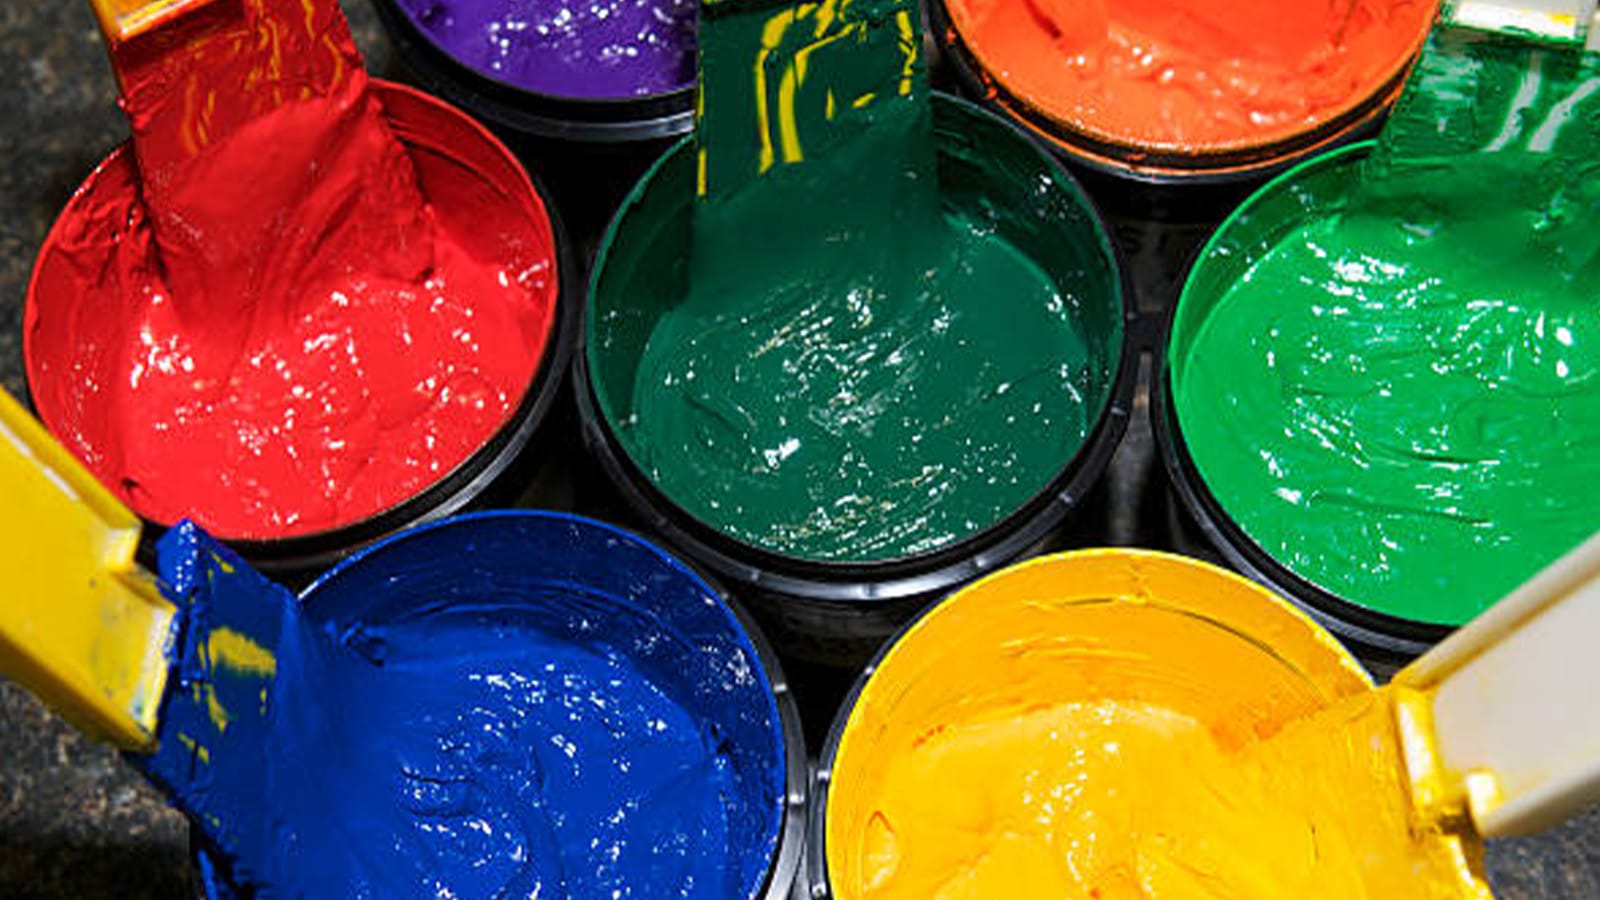 Pots of paint in red, green, blue and yellow